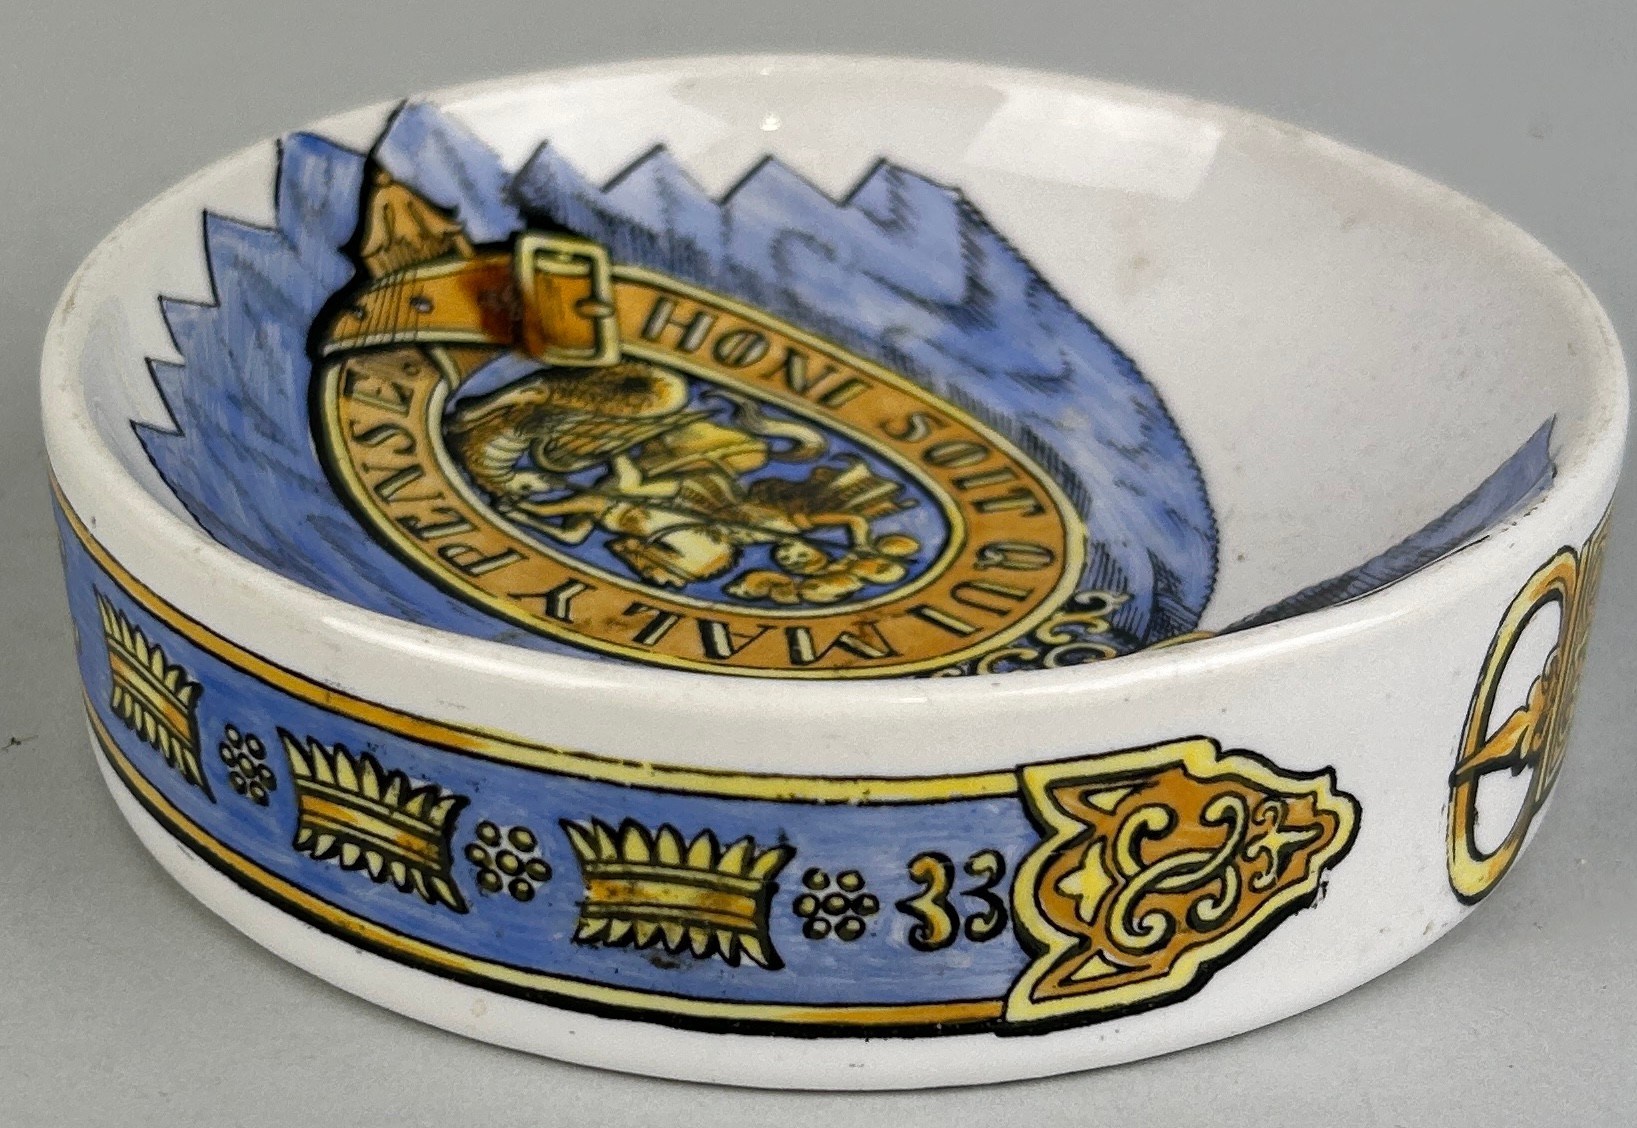 FORNASETTI MILANO: 'ORDER OF THE GARTER' ASHTRAY, Made in Italy. 13cm x 3cm - Image 3 of 4